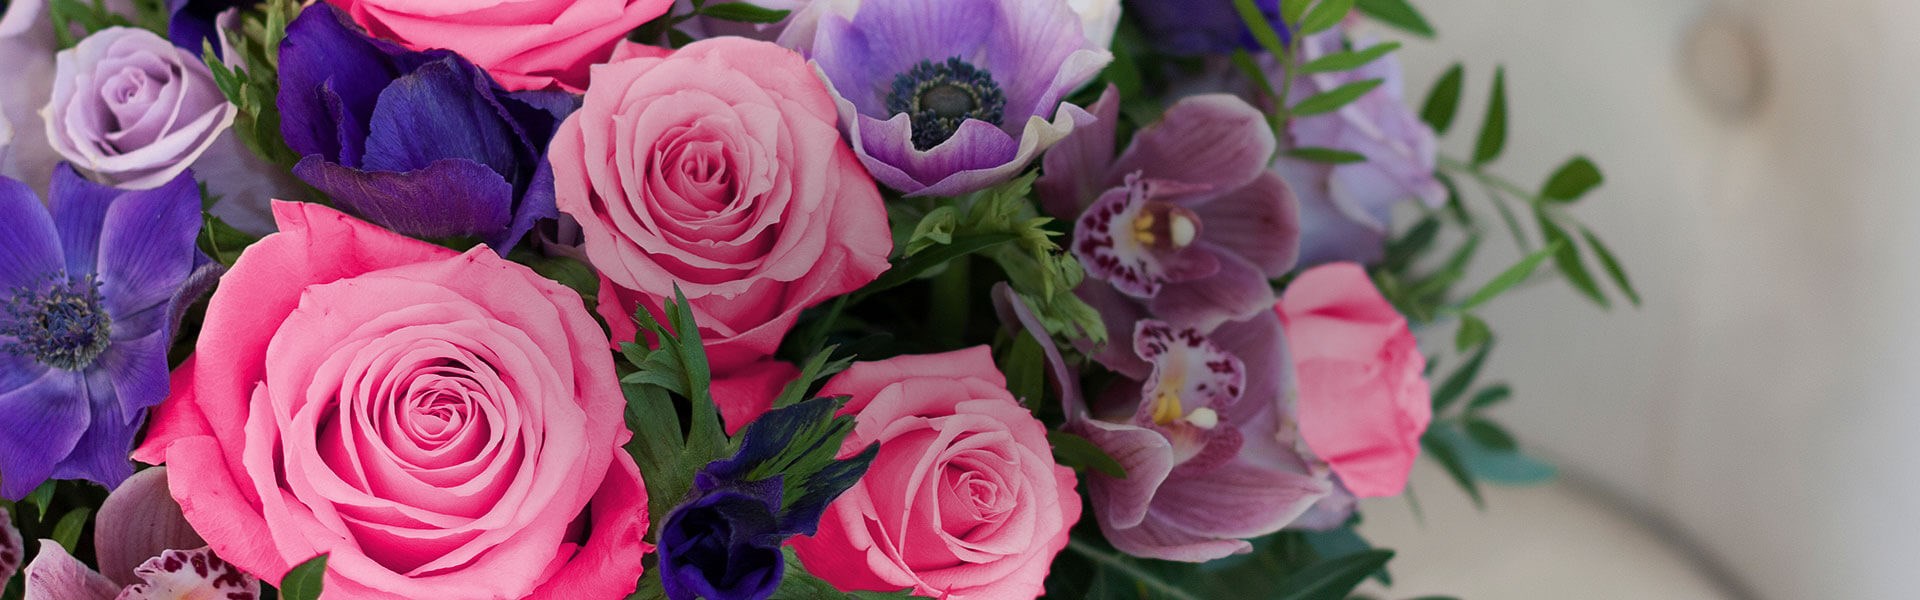 Wide angle of a bouquet of blue, pink and purple flowers